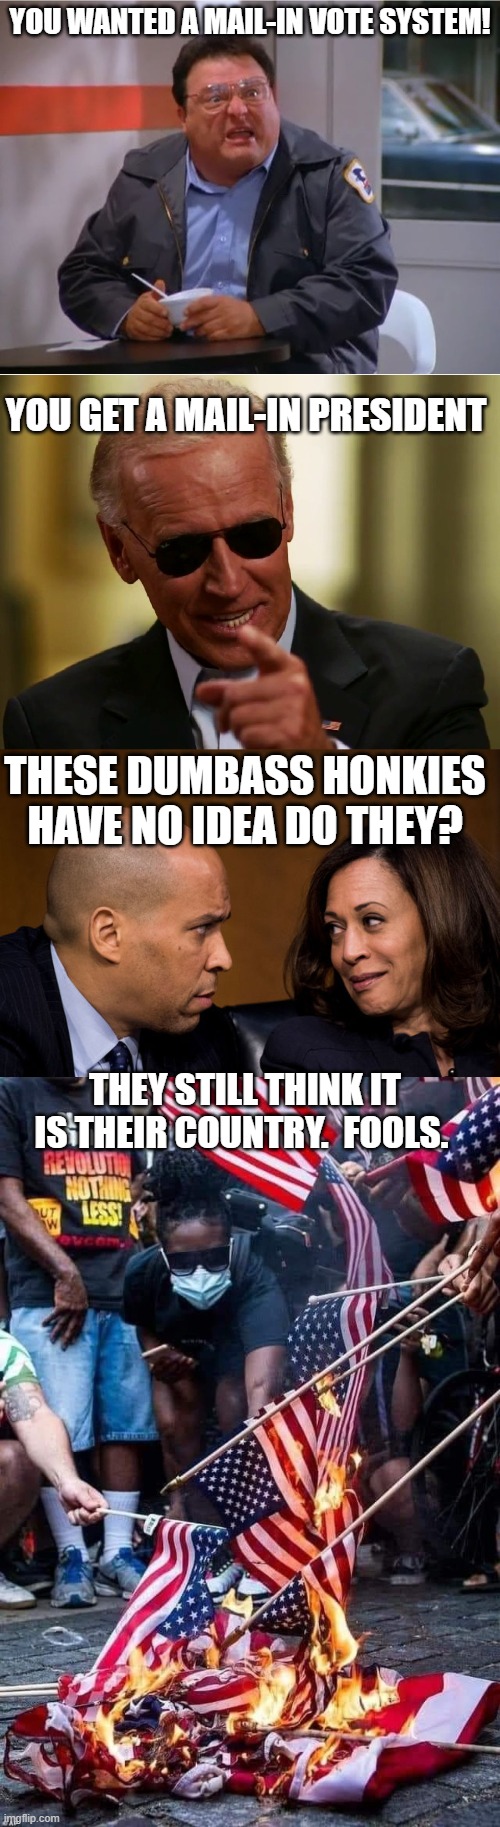 Those who think they win actually lose. | YOU WANTED A MAIL-IN VOTE SYSTEM! YOU GET A MAIL-IN PRESIDENT; THESE DUMBASS HONKIES HAVE NO IDEA DO THEY? THEY STILL THINK IT IS THEIR COUNTRY.  FOOLS. | image tagged in newman angry mailman,cool joe biden,corey booker and kamala harris,flag burners | made w/ Imgflip meme maker